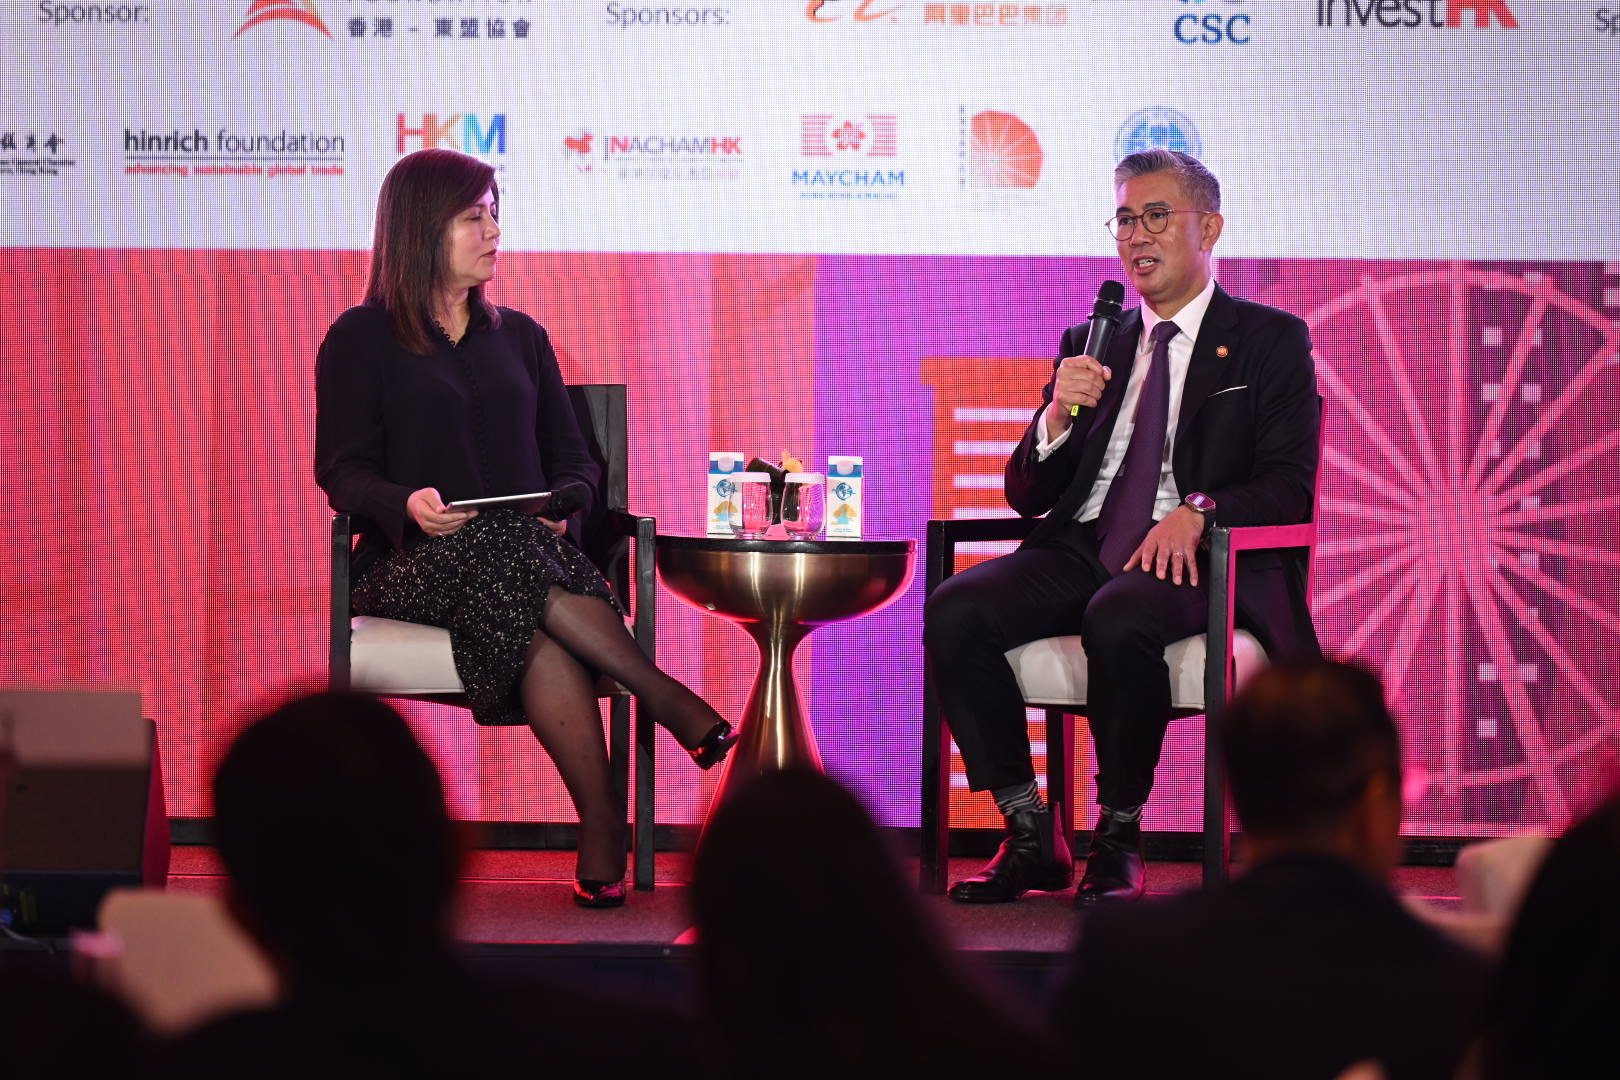 SCMP’s Executive Managing Editor Zuraidah Ibrahim talks to Malaysia’s Minister for International Trade and Industry Tengku Zafrul Aziz, at SCMP’s China Conference: Southeast Asia 2023. Photo: Handout
